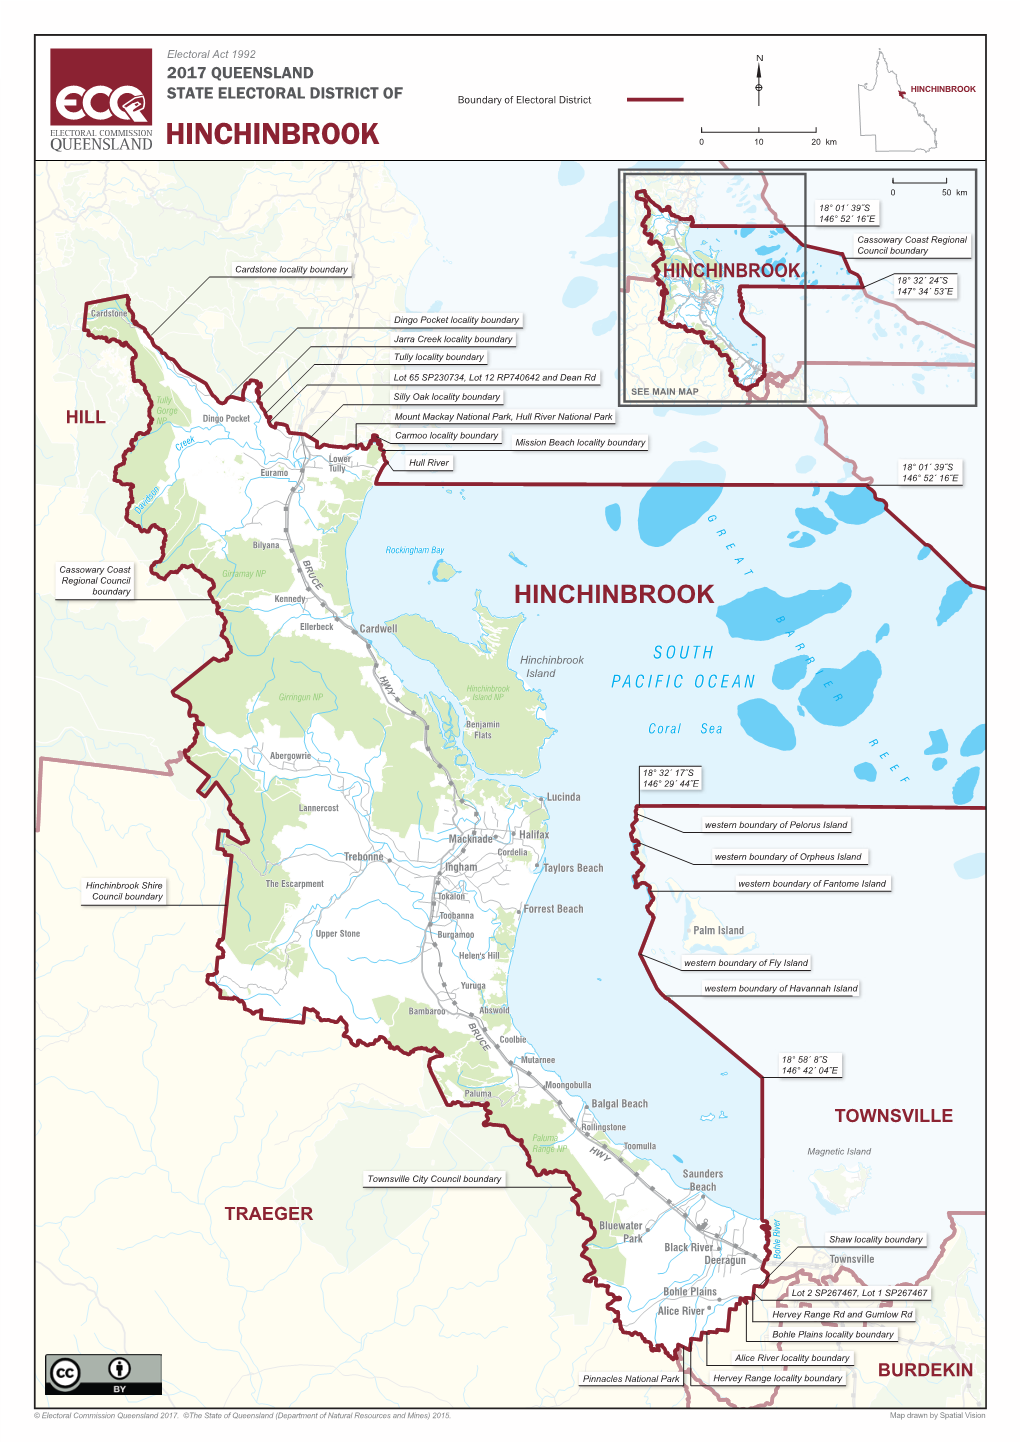 HINCHINBROOK STATE ELECTORAL DISTRICT of Boundary of Electoral District